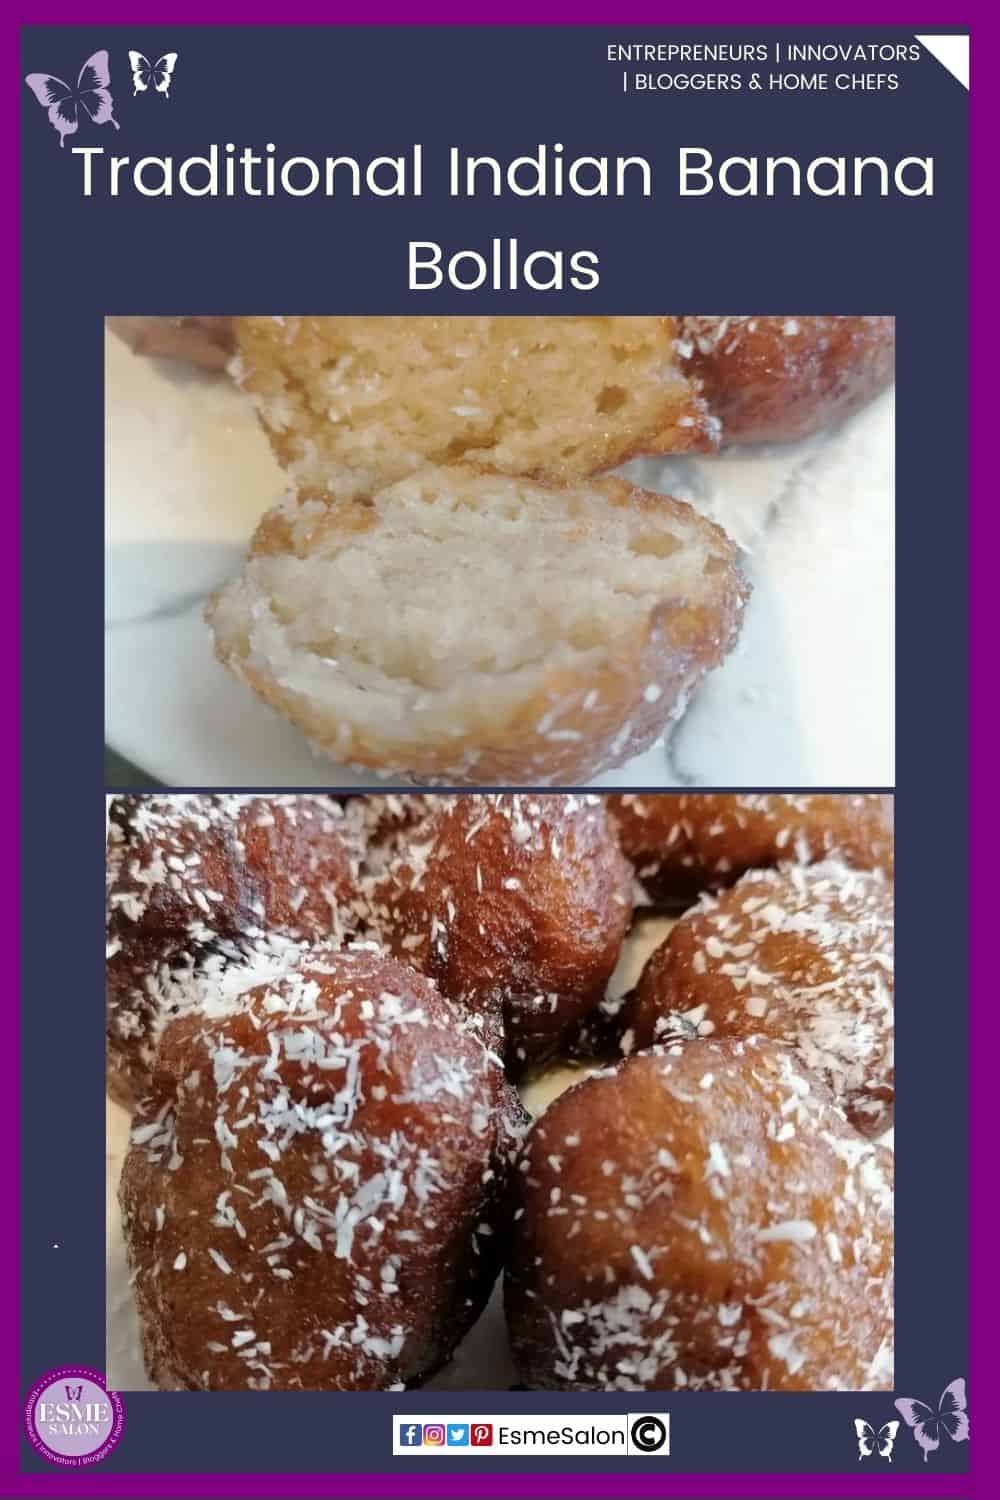 an image of a round banana fried fritter / bolla and dipped syrup and then covered in coconut